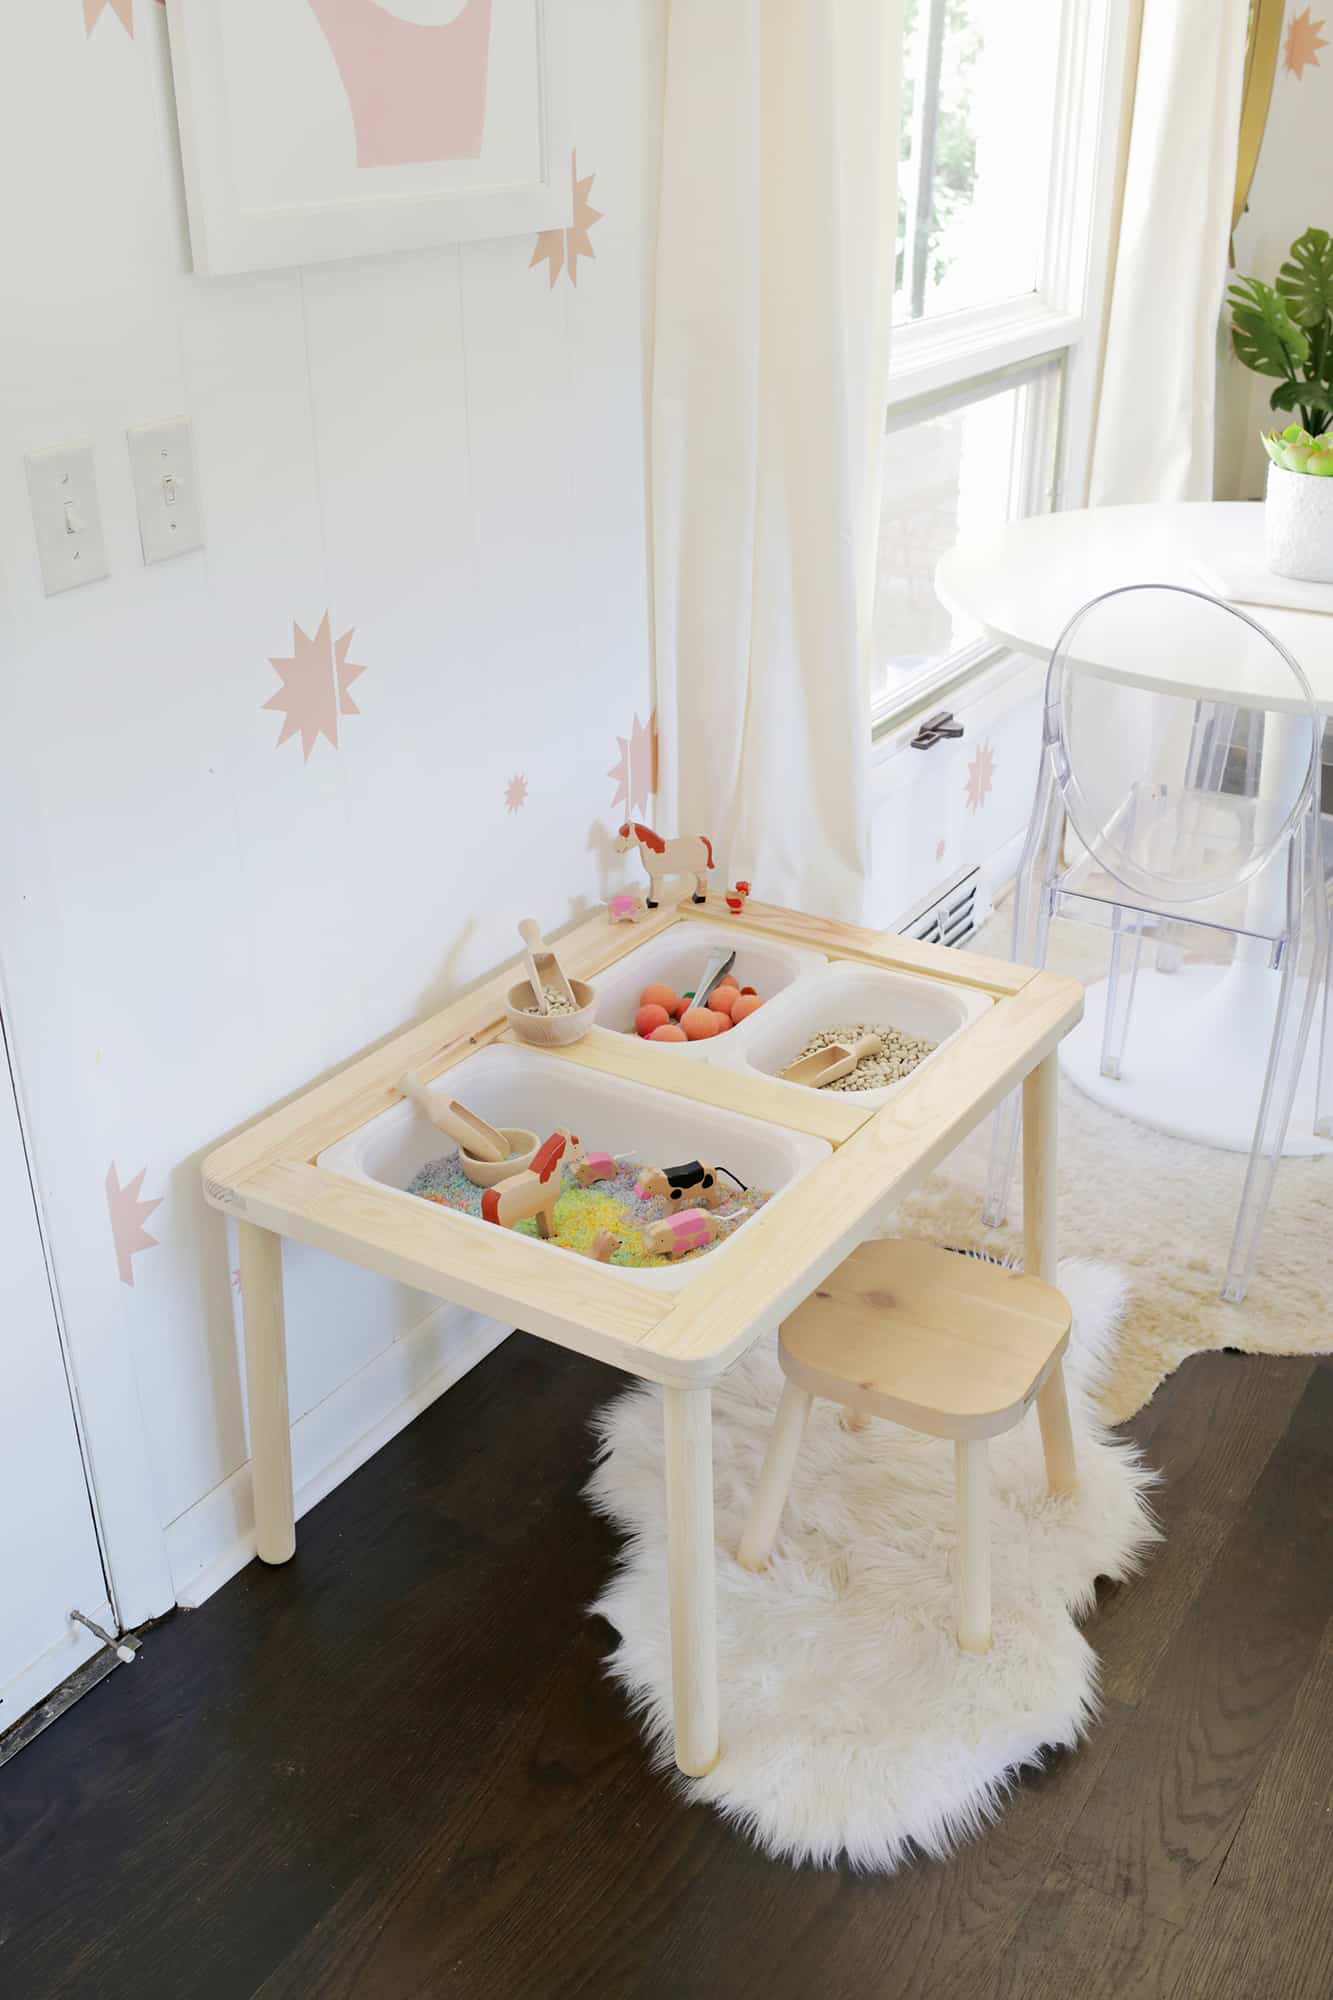 wooden sensory table with a small wooden stool on a white rug